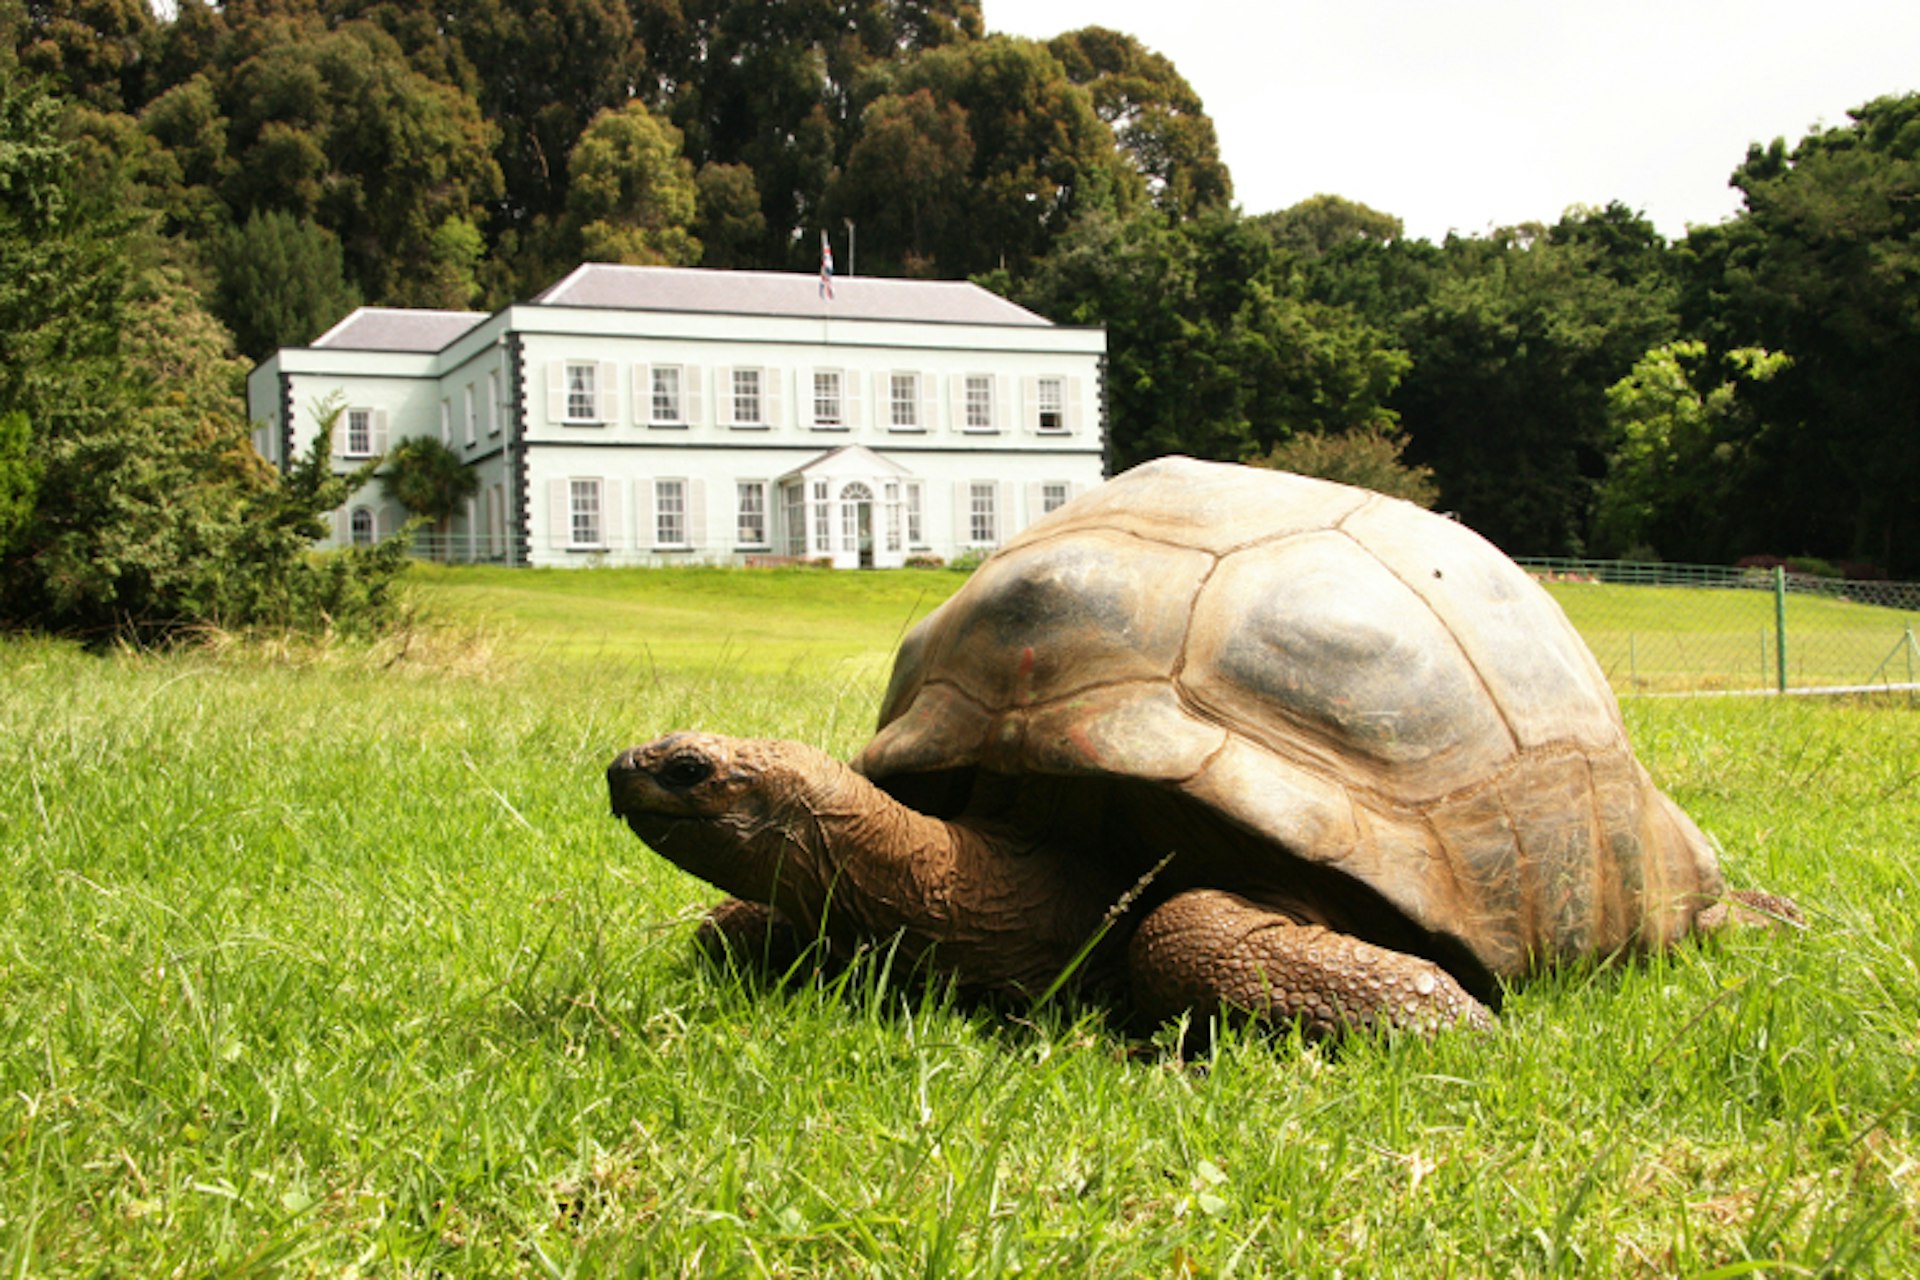 Jonathan, the more than 180-year-old tortoise, and Plantation House. Image by Darrin Henry / Getty Images